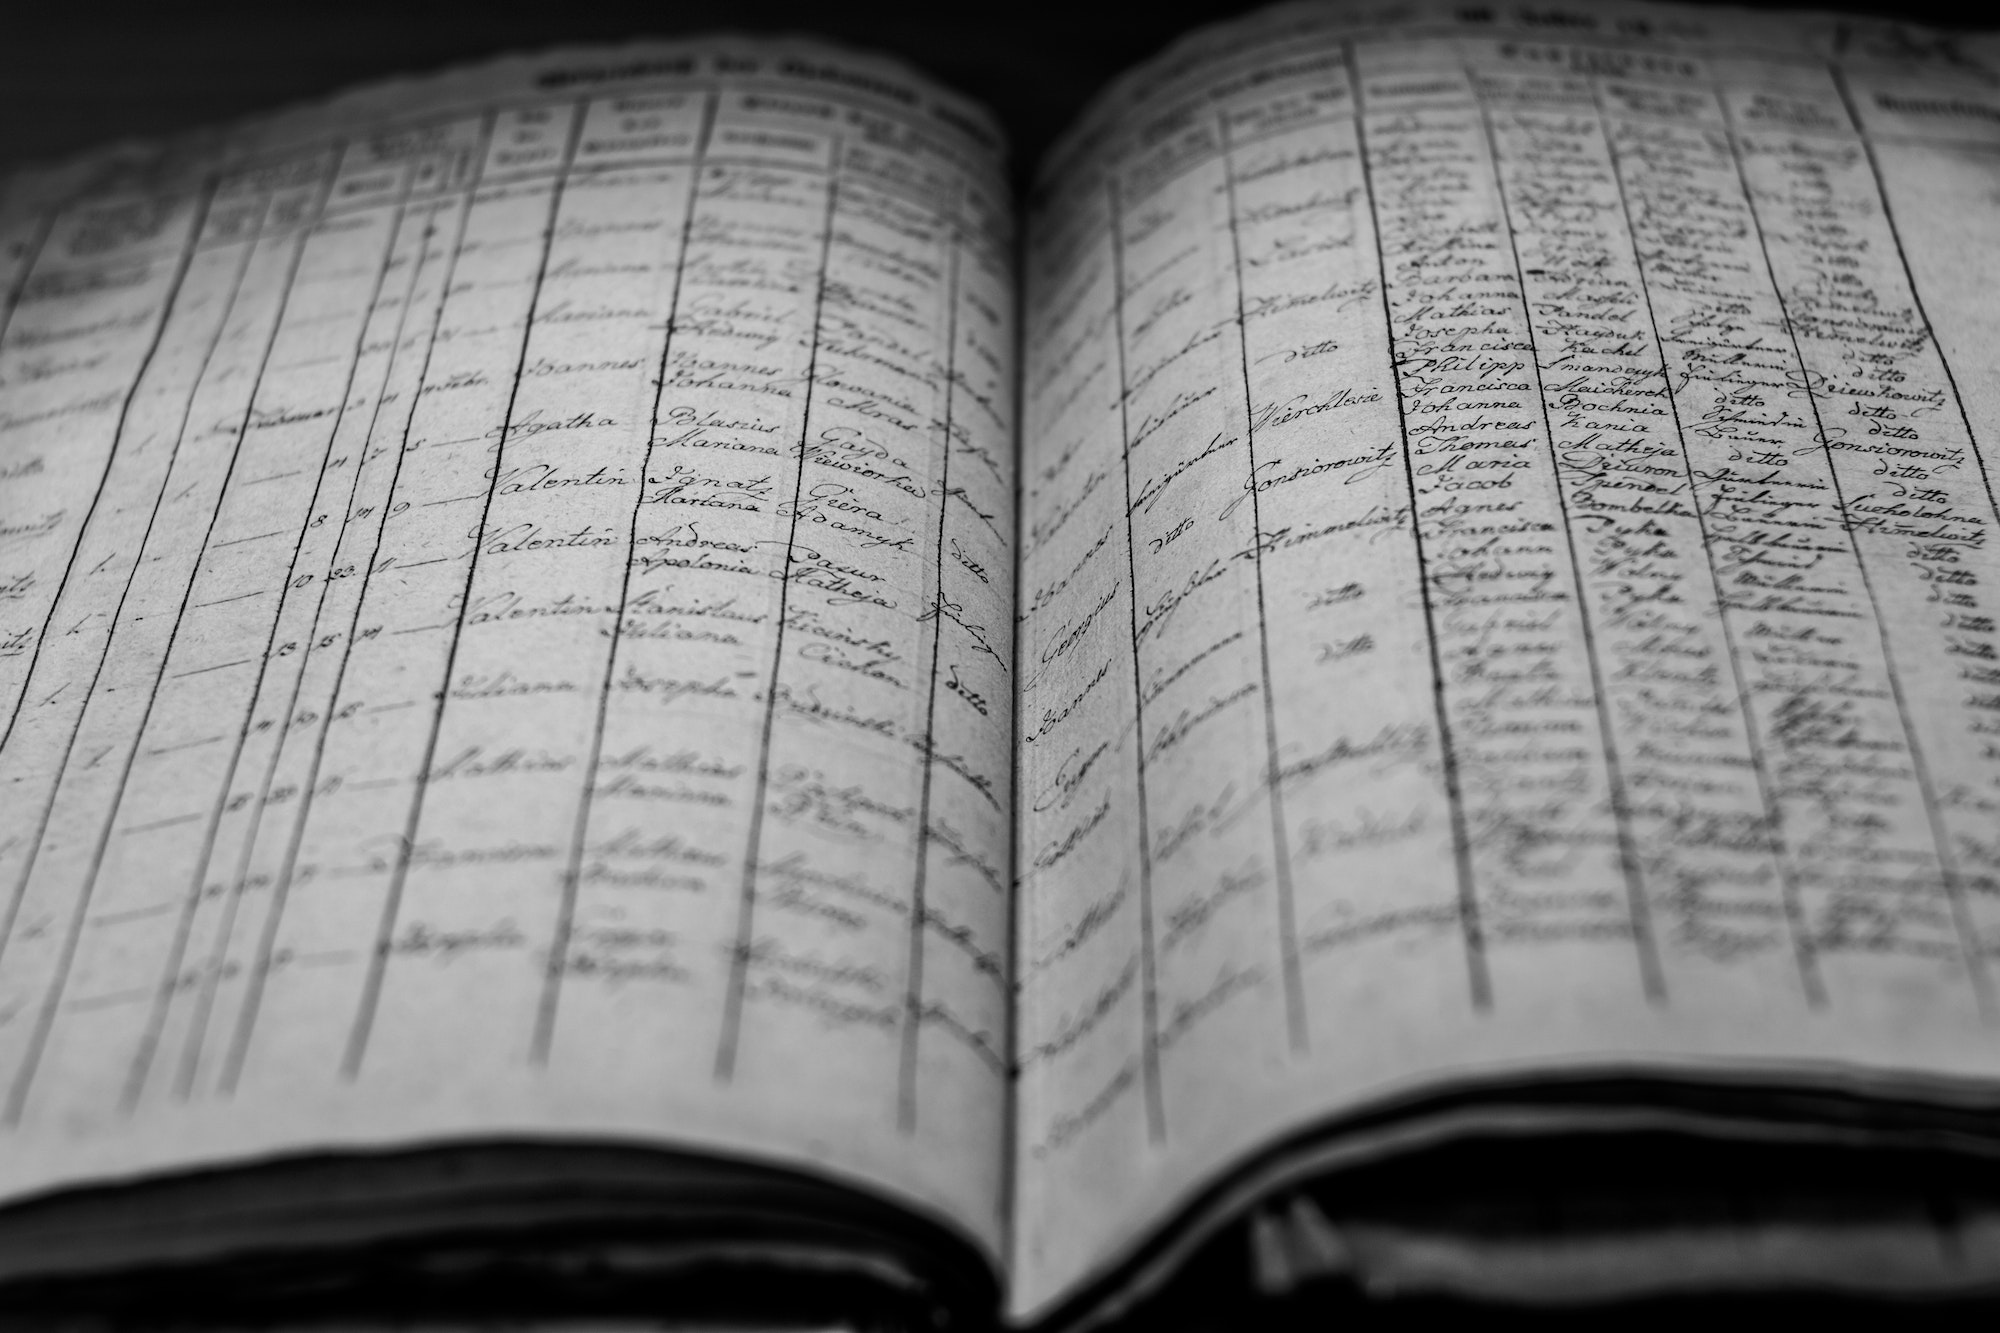 Closeup of an old book of local records with list of residents' names and information